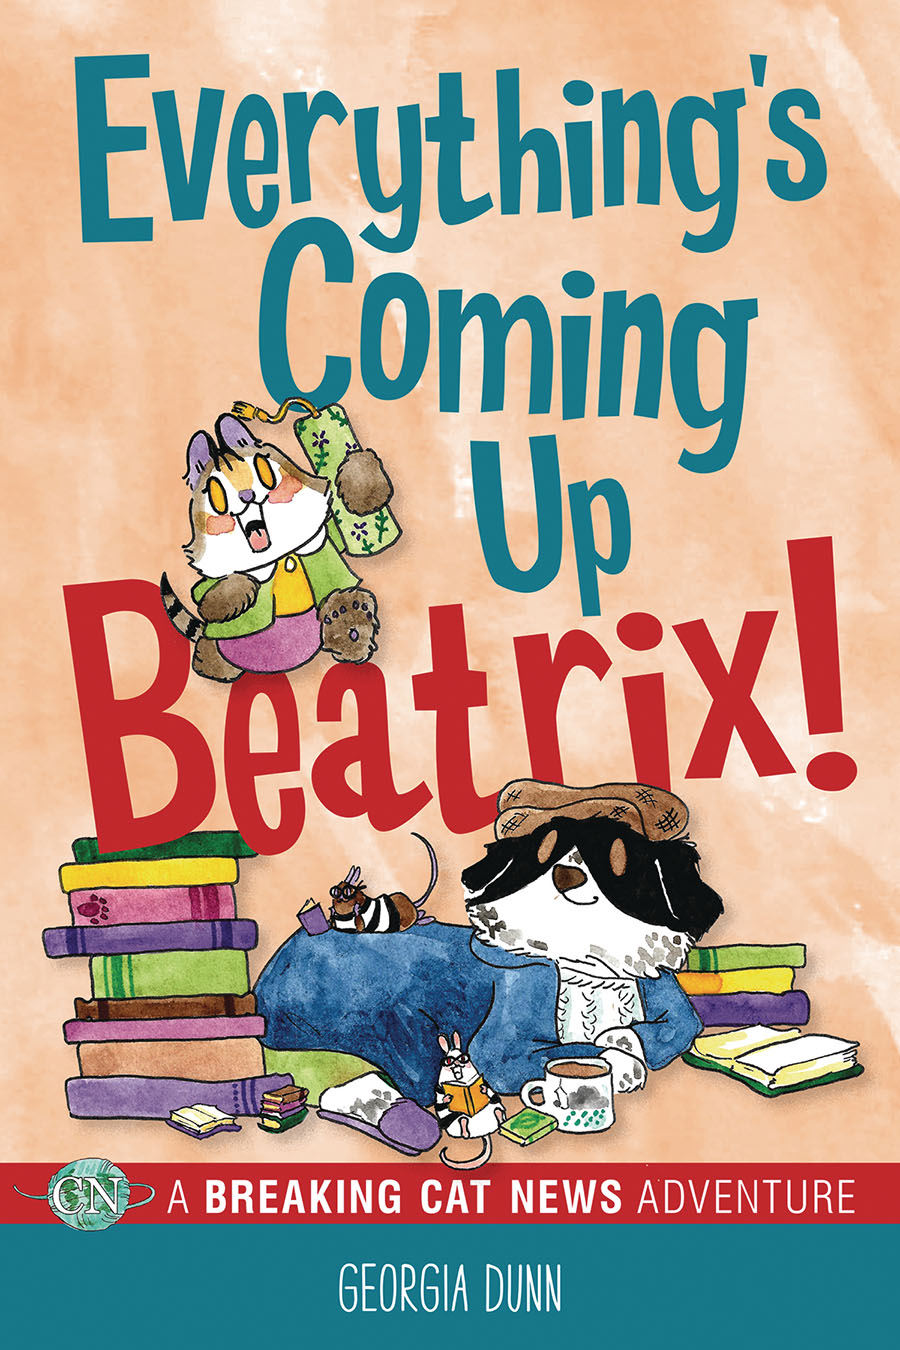 Everythings Coming Up Beatrix A Breaking Cat News Adventure TP